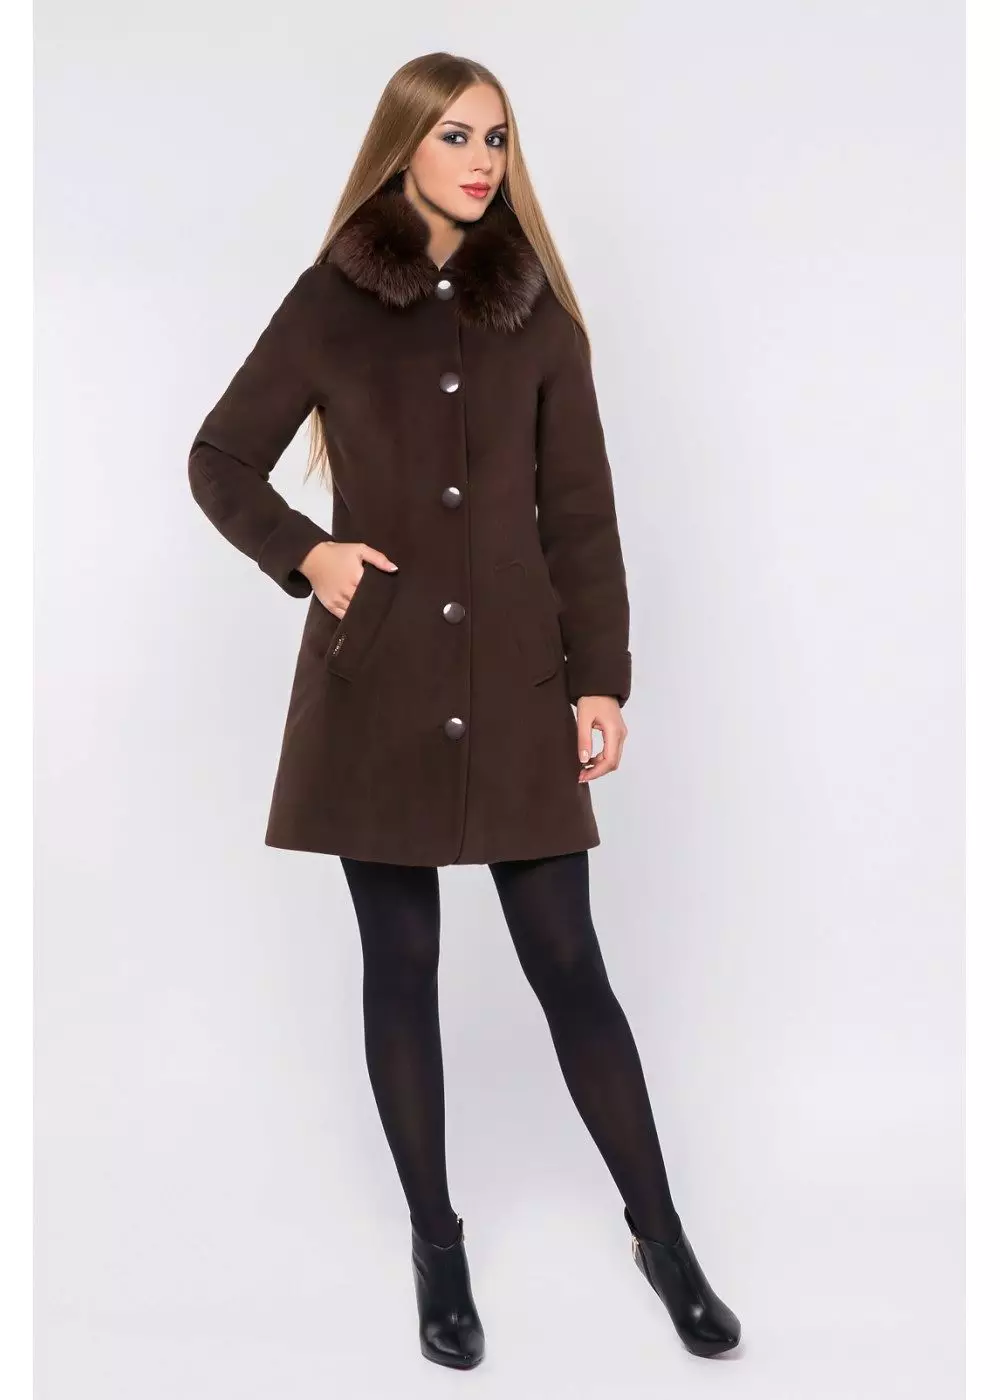 Winter Women's Coat (384 photos): Fashionable 2021 on Sintepsum, Hooded, Youth, Woolen, For Pregnant, Coat Down 643_20